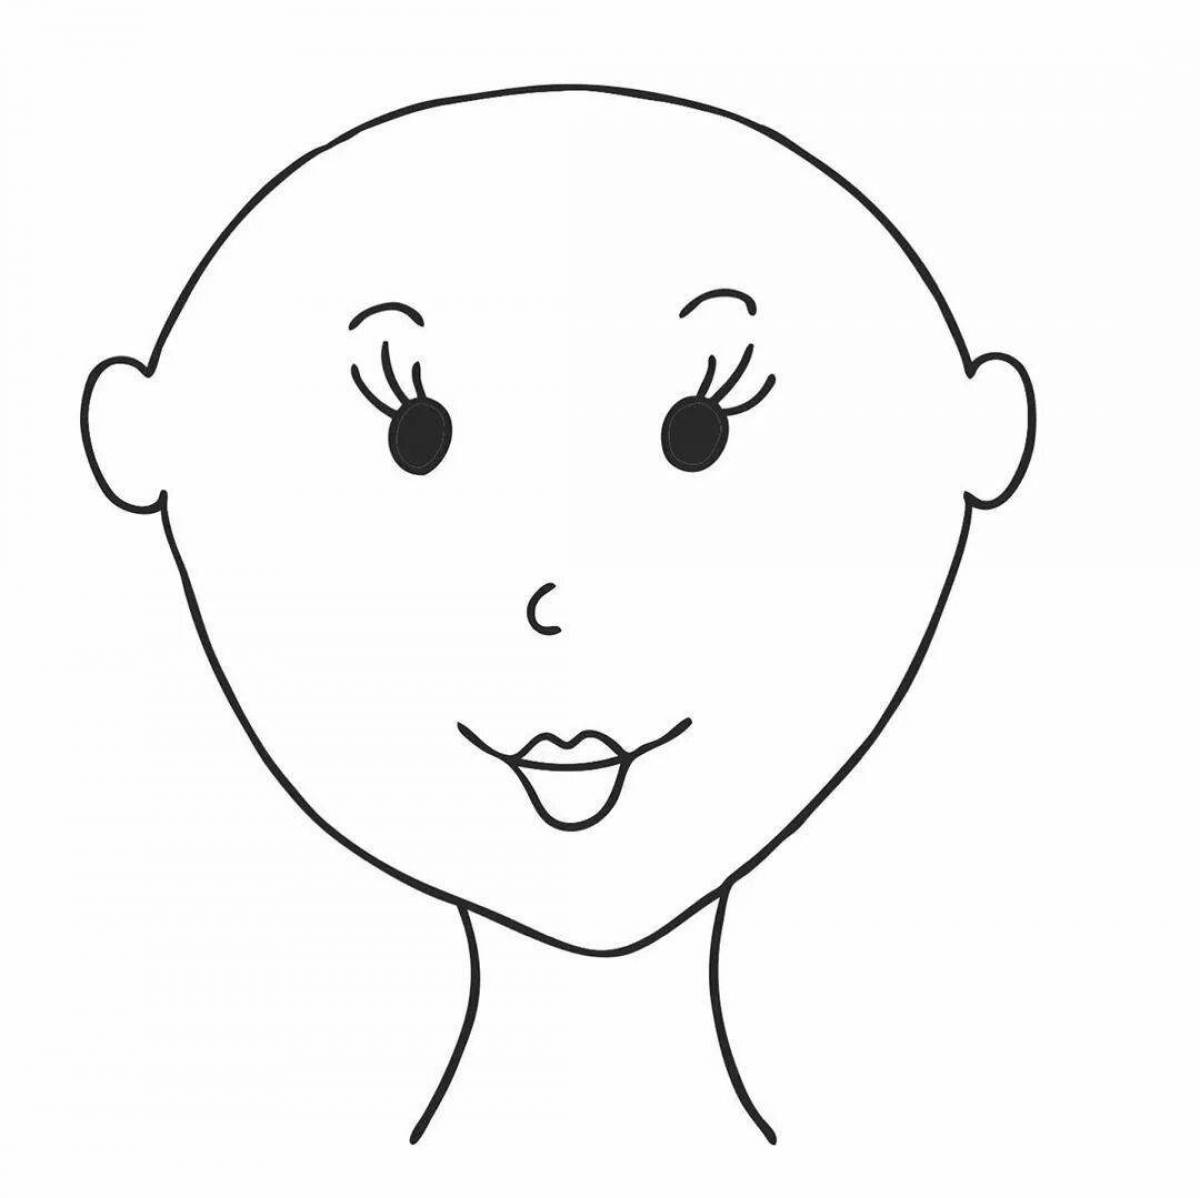 Colorful head coloring page for kids